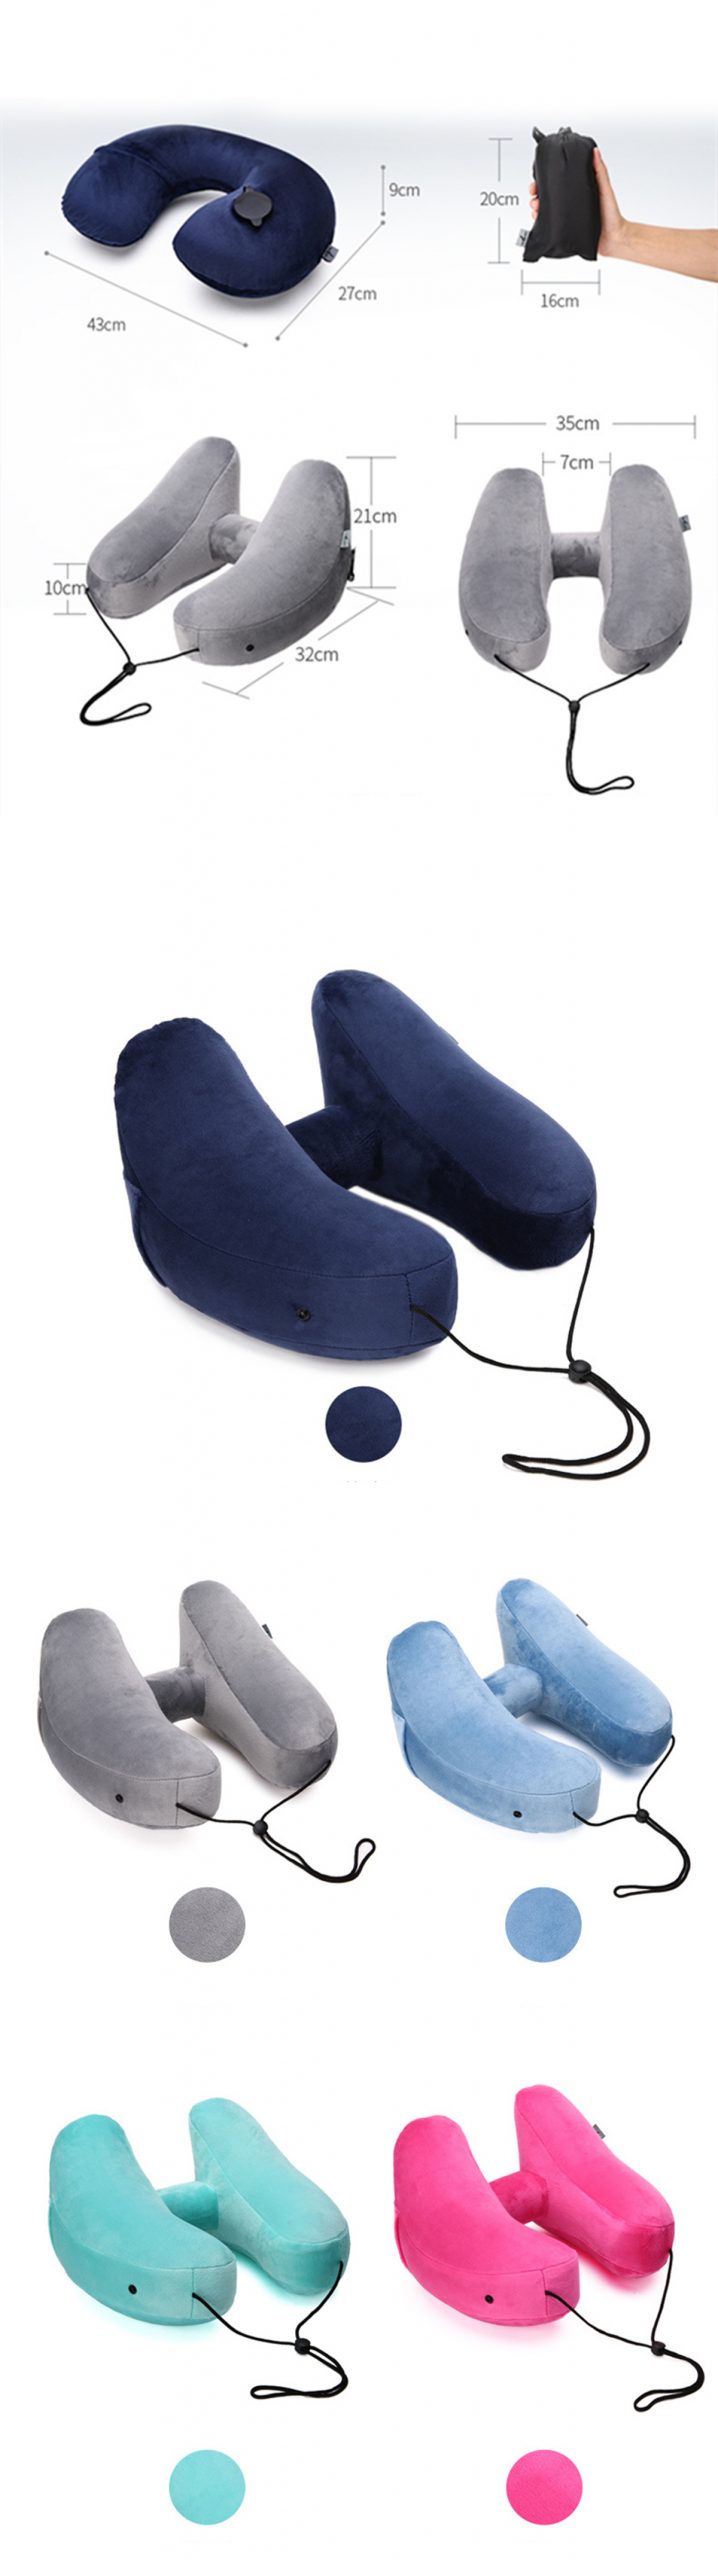 H-Shaped Inflatable Travel Pillows